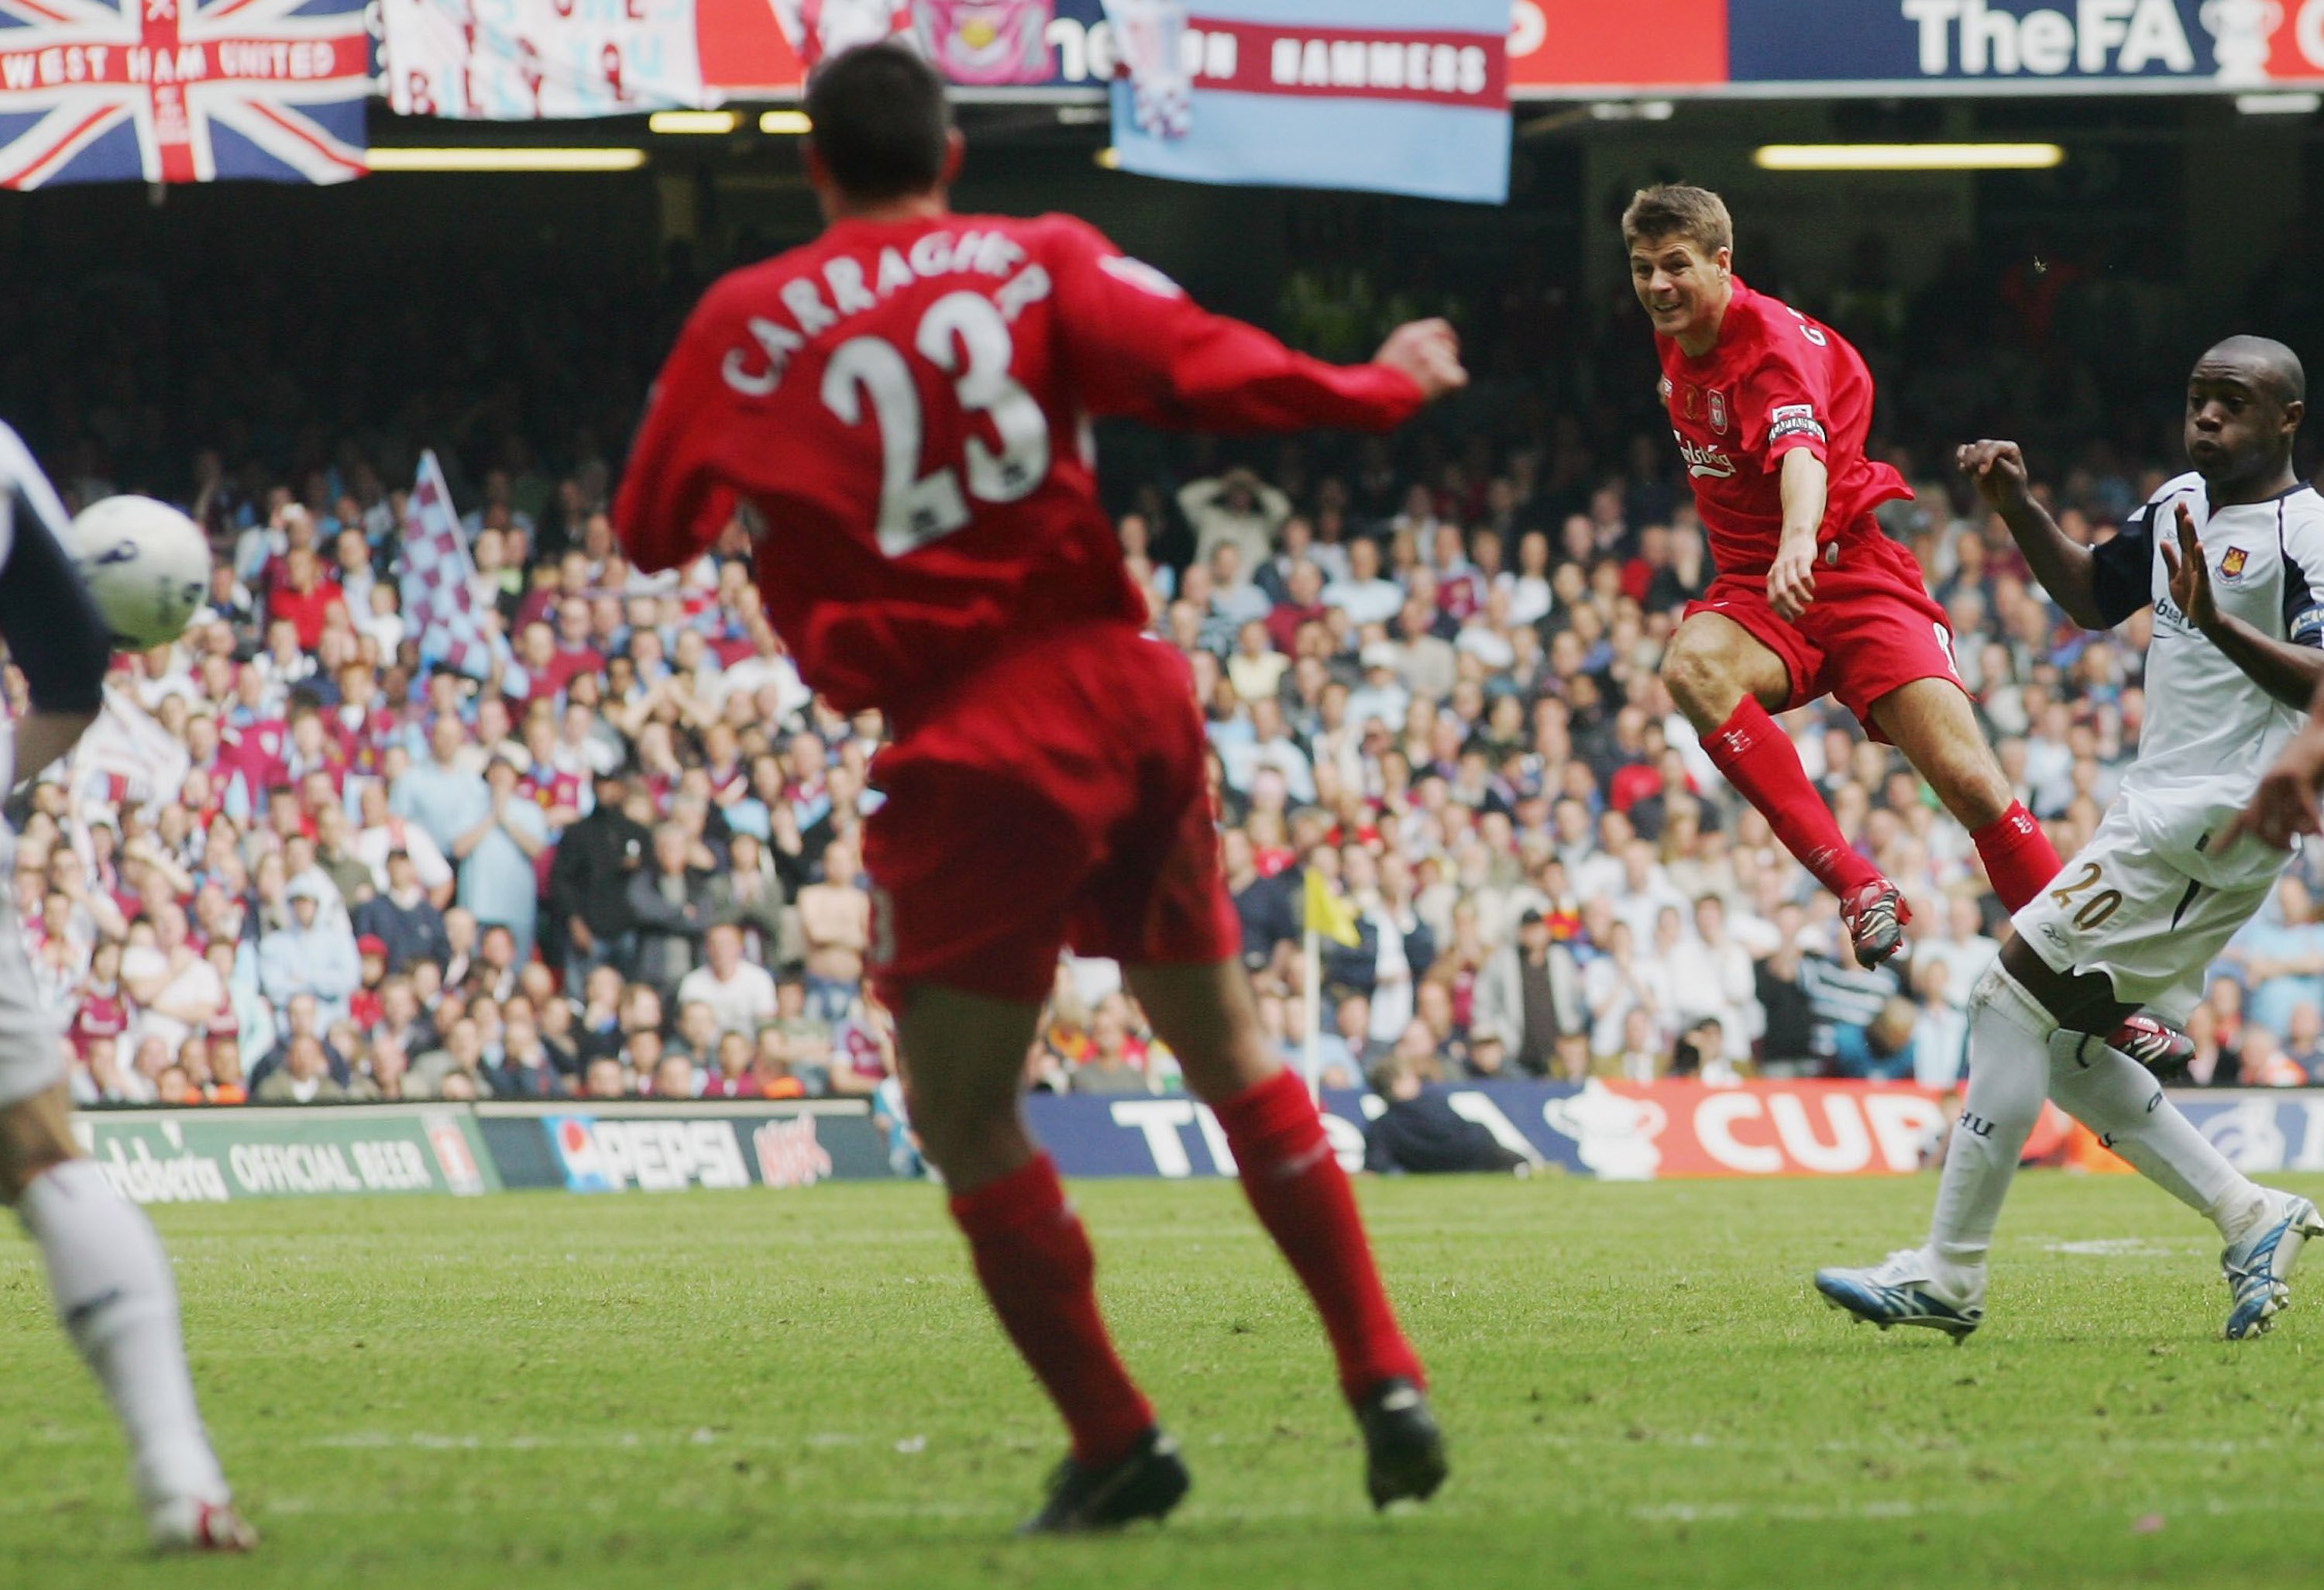 Steven Gerrard's scores a last-minute equaliser to take West Ham to extra-time in the 2006 FA Cup Final